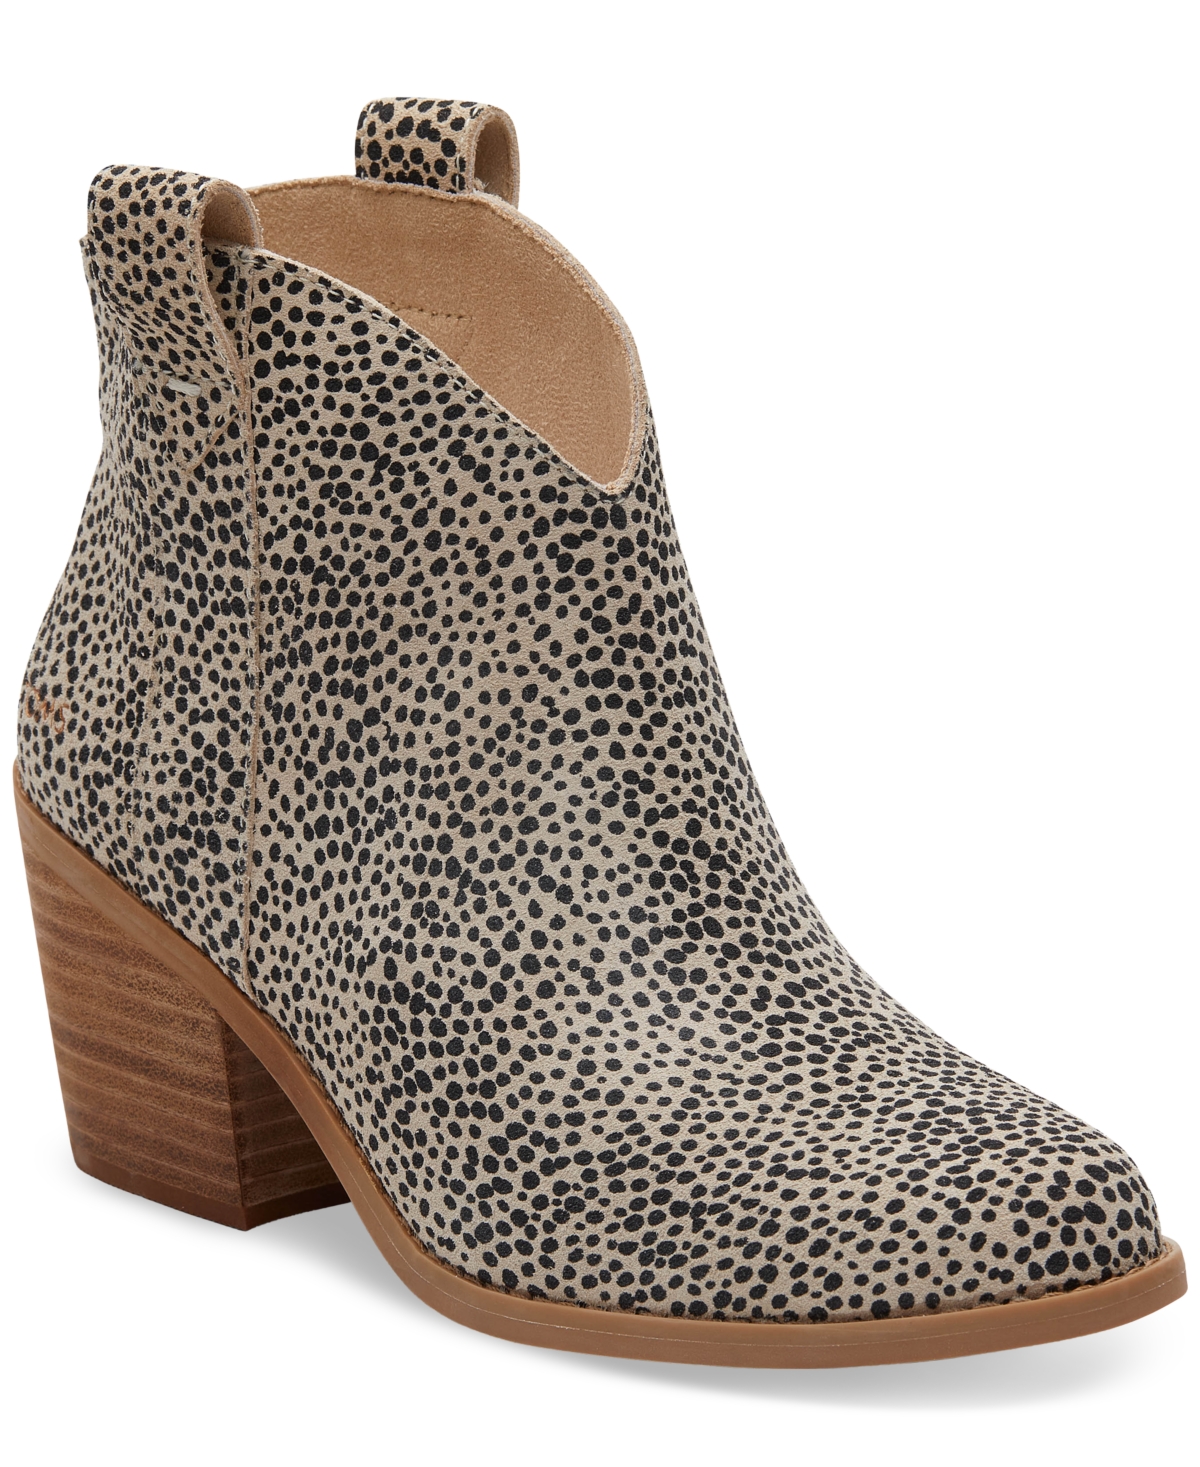 TOMS WOMEN'S CONSTANCE PULL ON WESTERN BOOTIES